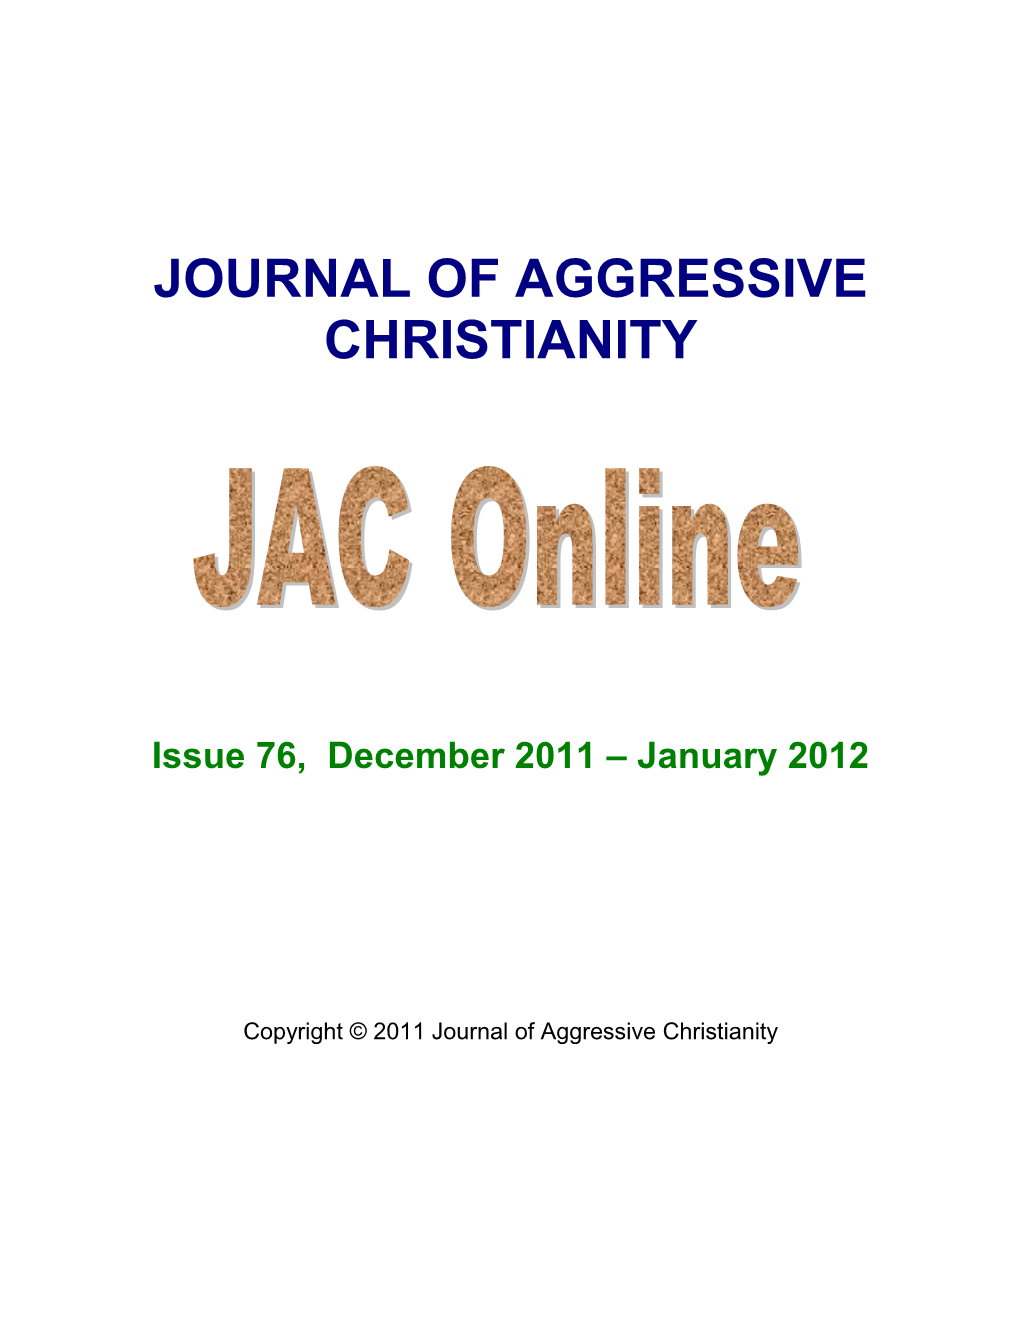 JOURNAL of AGGRESSIVE CHRISTIANITY Issue 76, December 2011 – January 2012